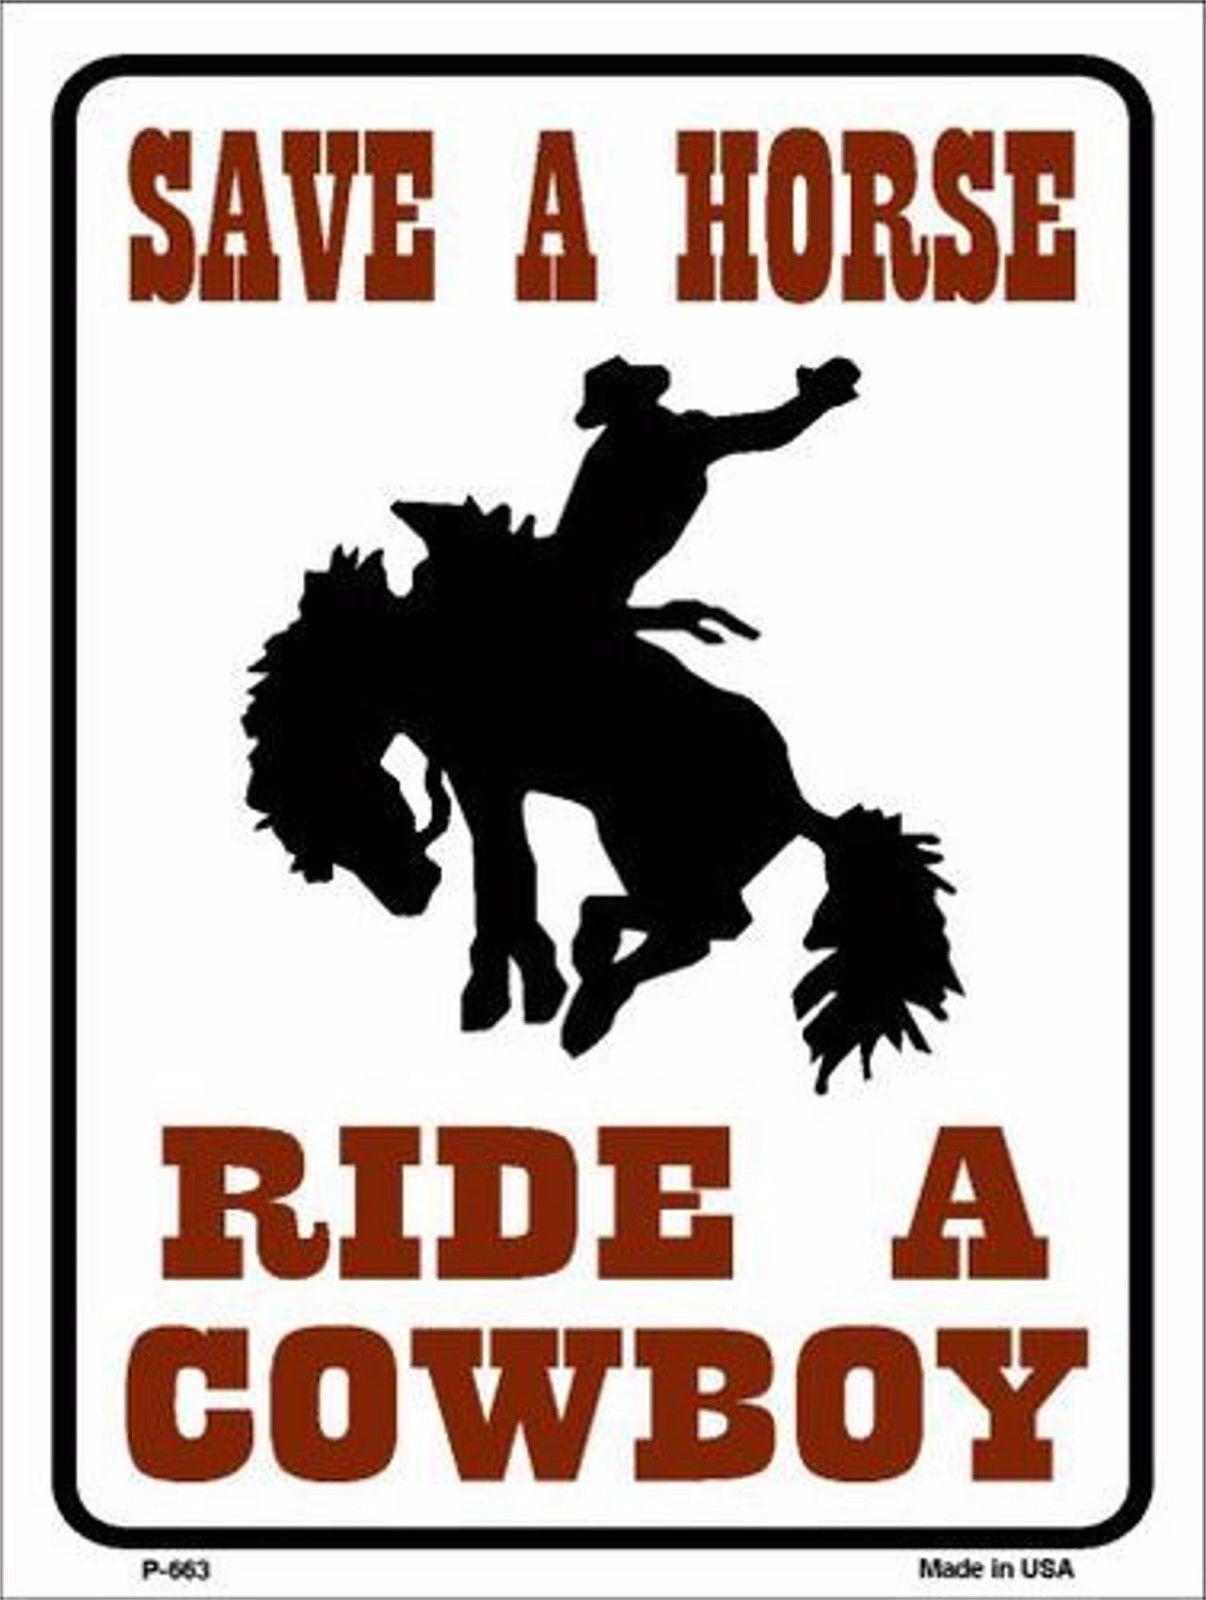 Save a Horse Ride a Cowboy Humor 9" x 12" Metal Novelty Parking Sign - $9.95